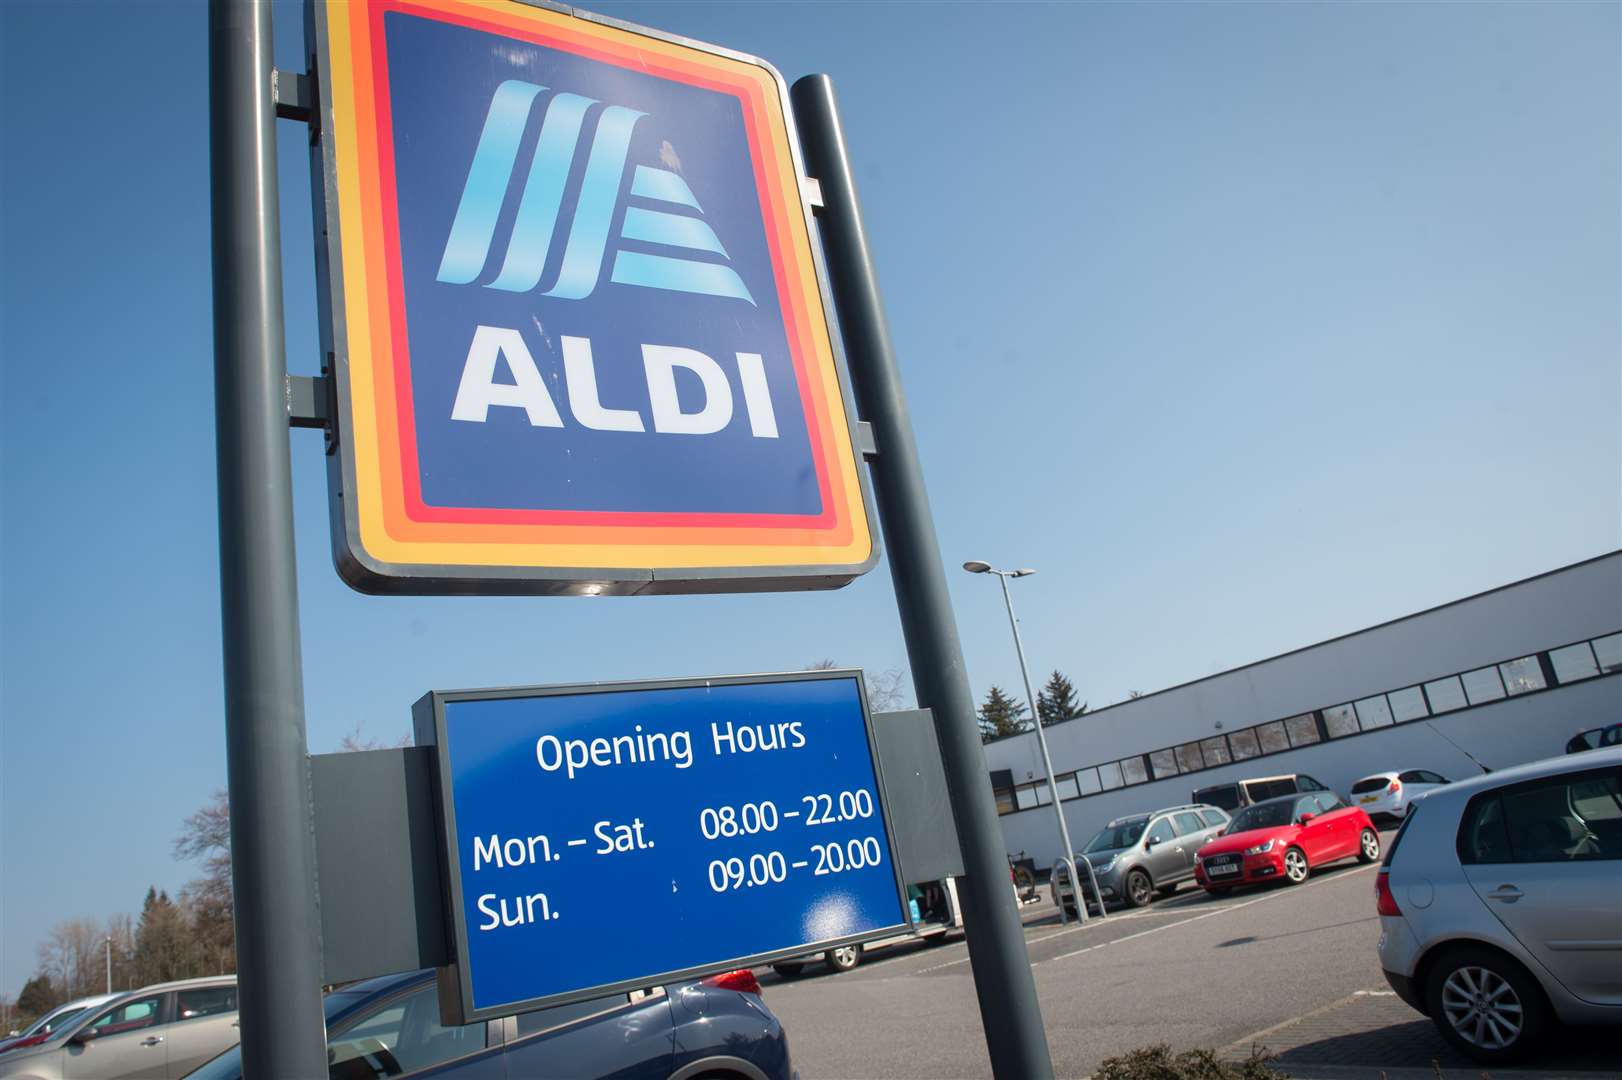 Aldi had the largest percentage of Scottish produce overall, according to the ShelfWatch survey.